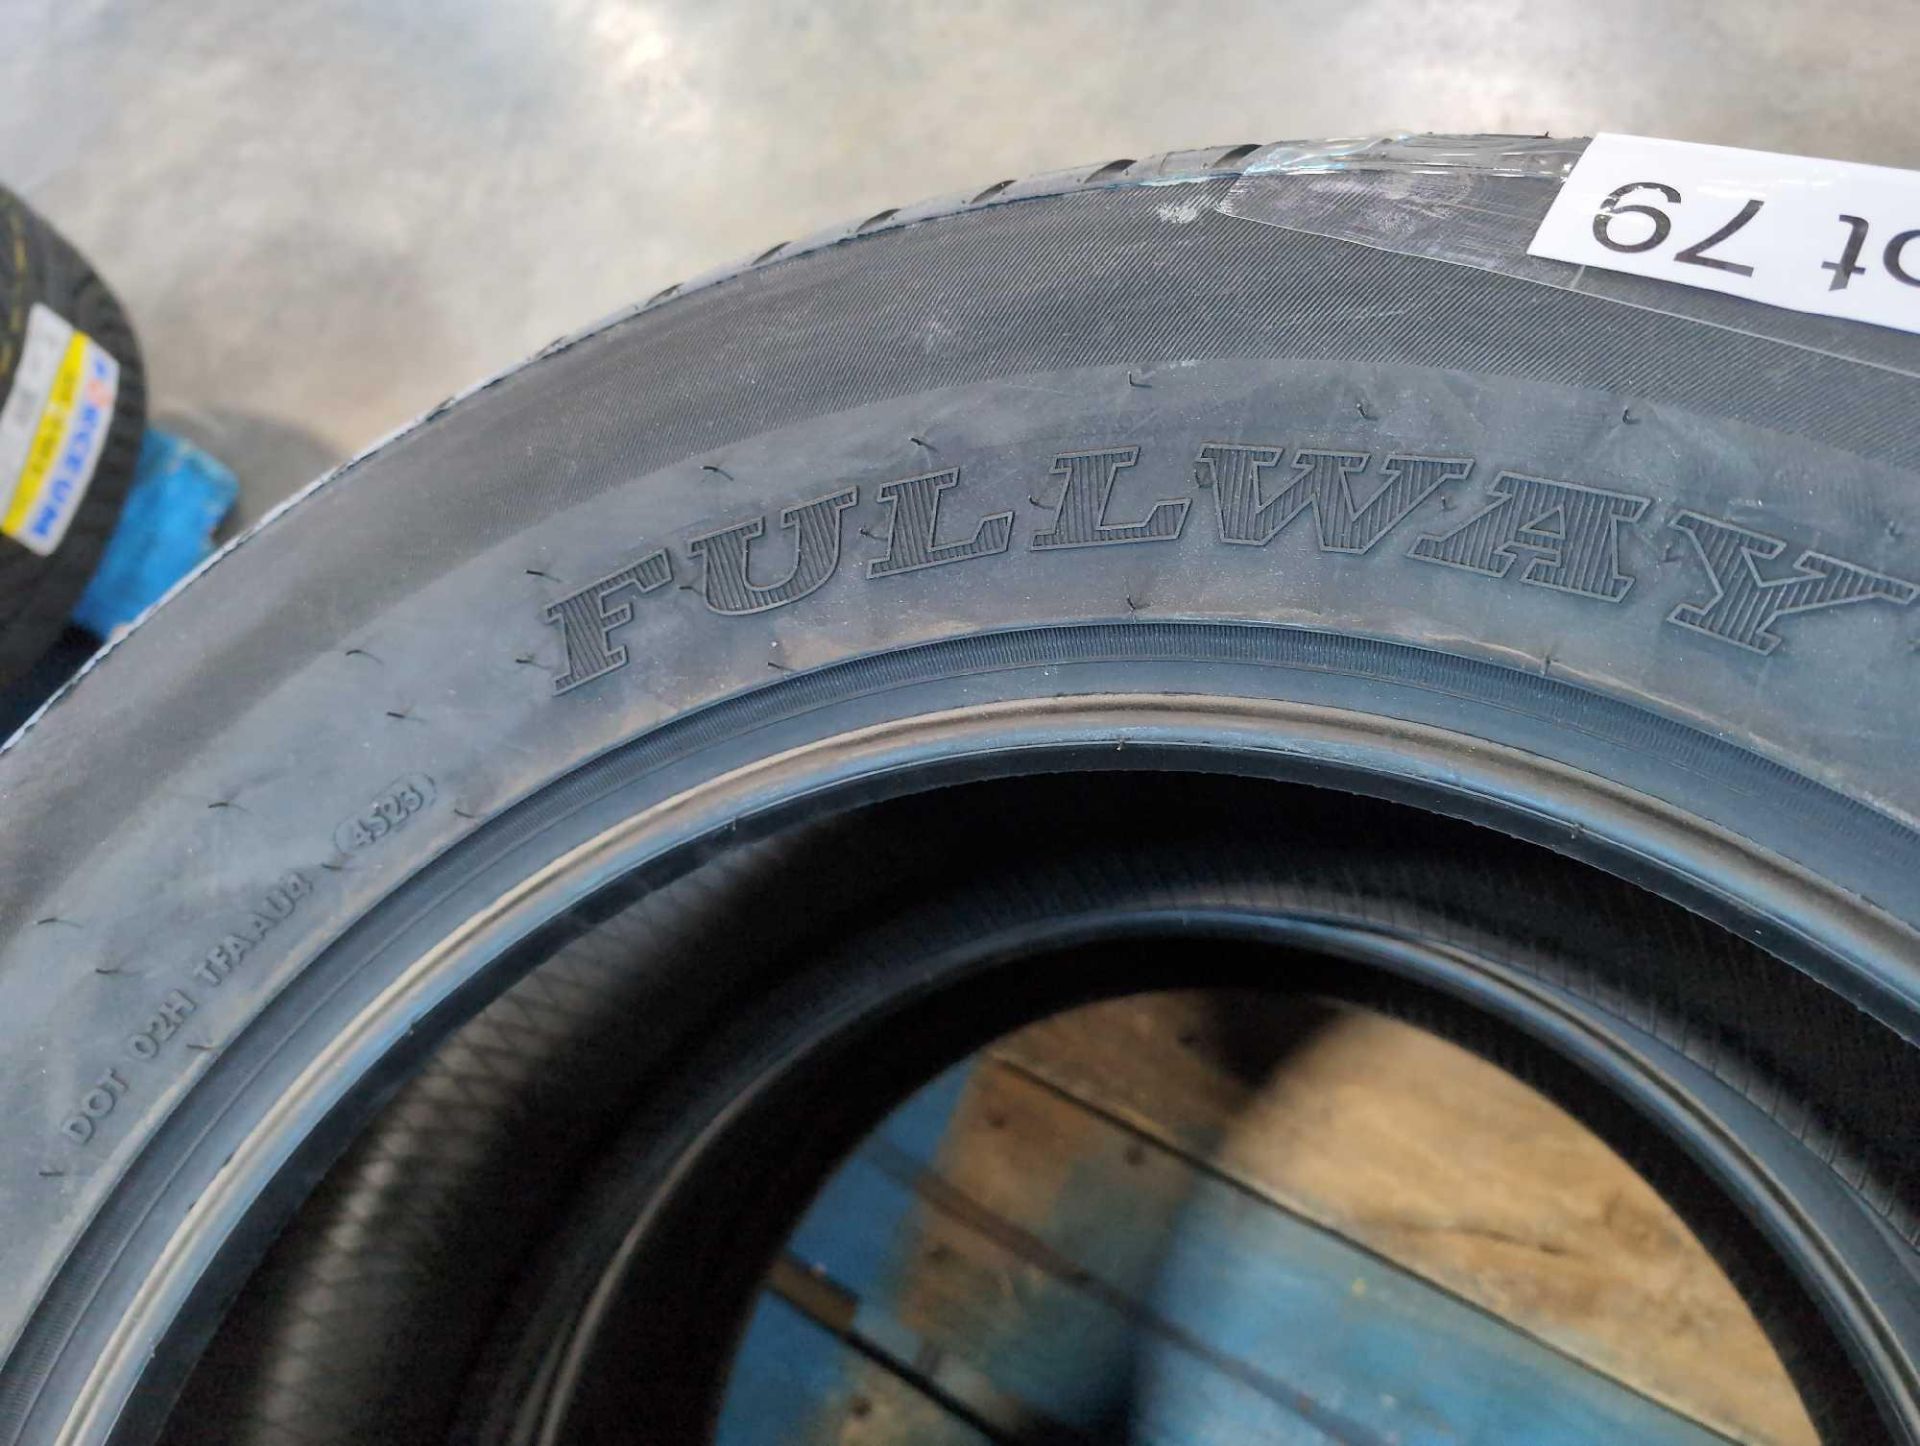 Pair of Fullway HS266 Tires, and Pair of Bfgoodrich All terrain tires - Image 5 of 10